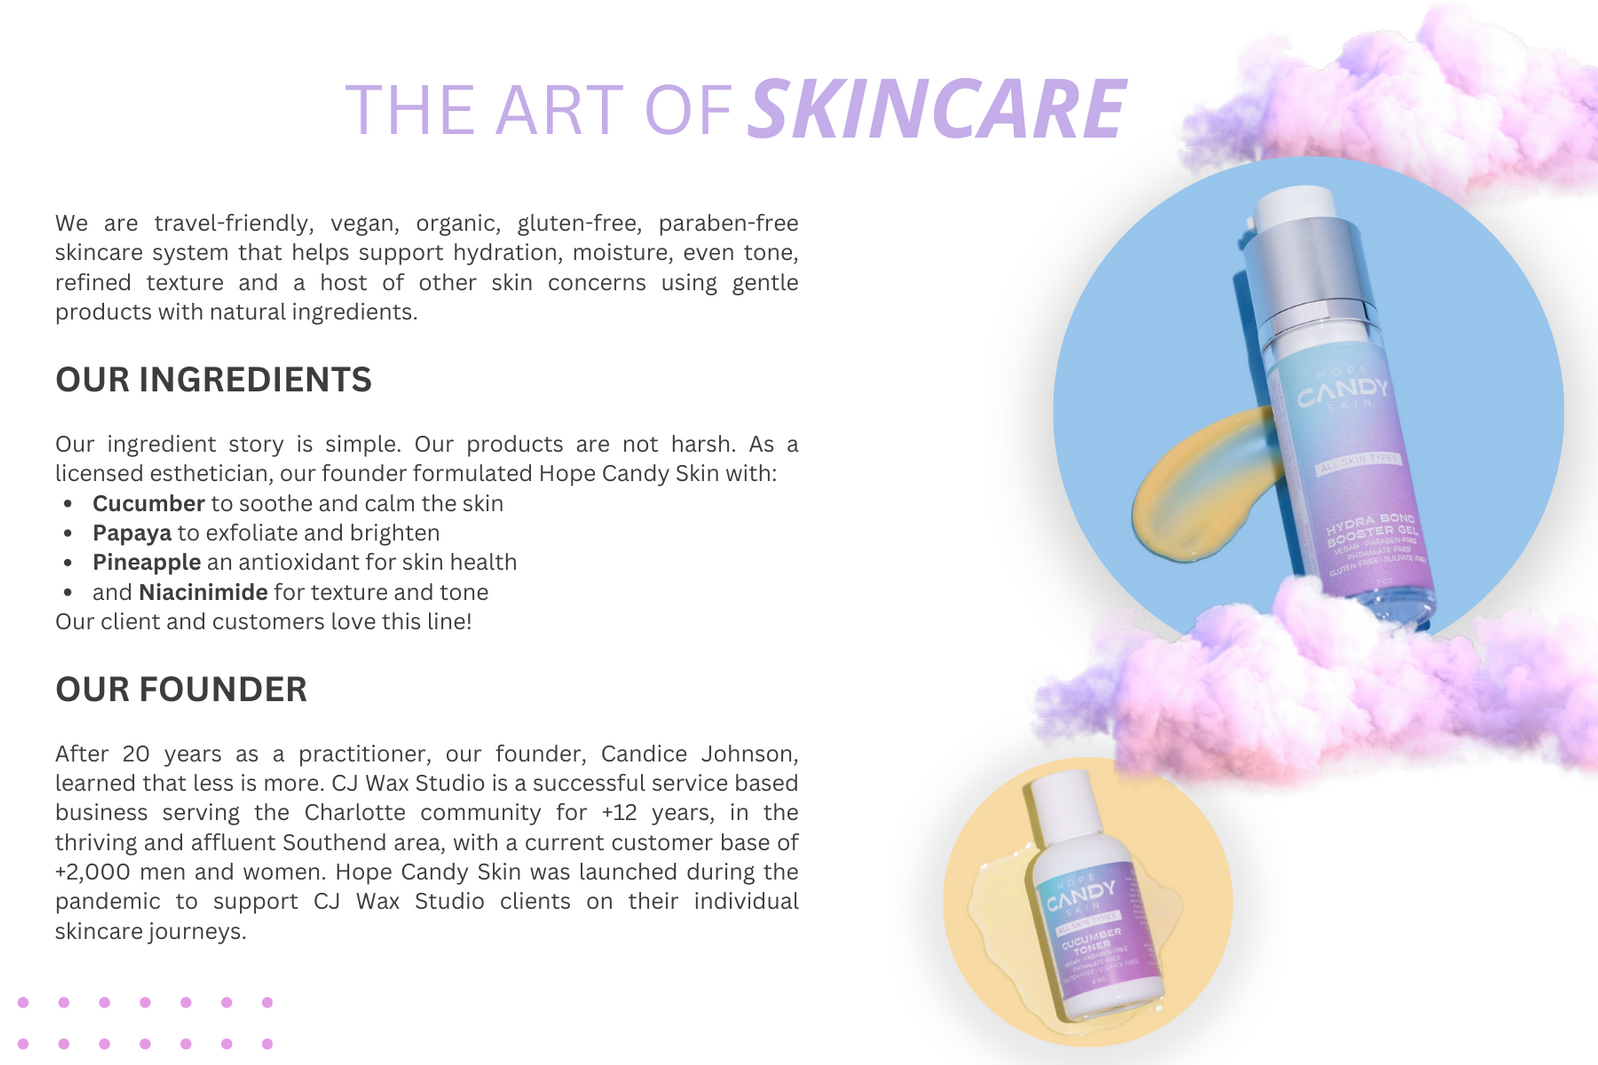 Learn More About Hope Candy Skincare